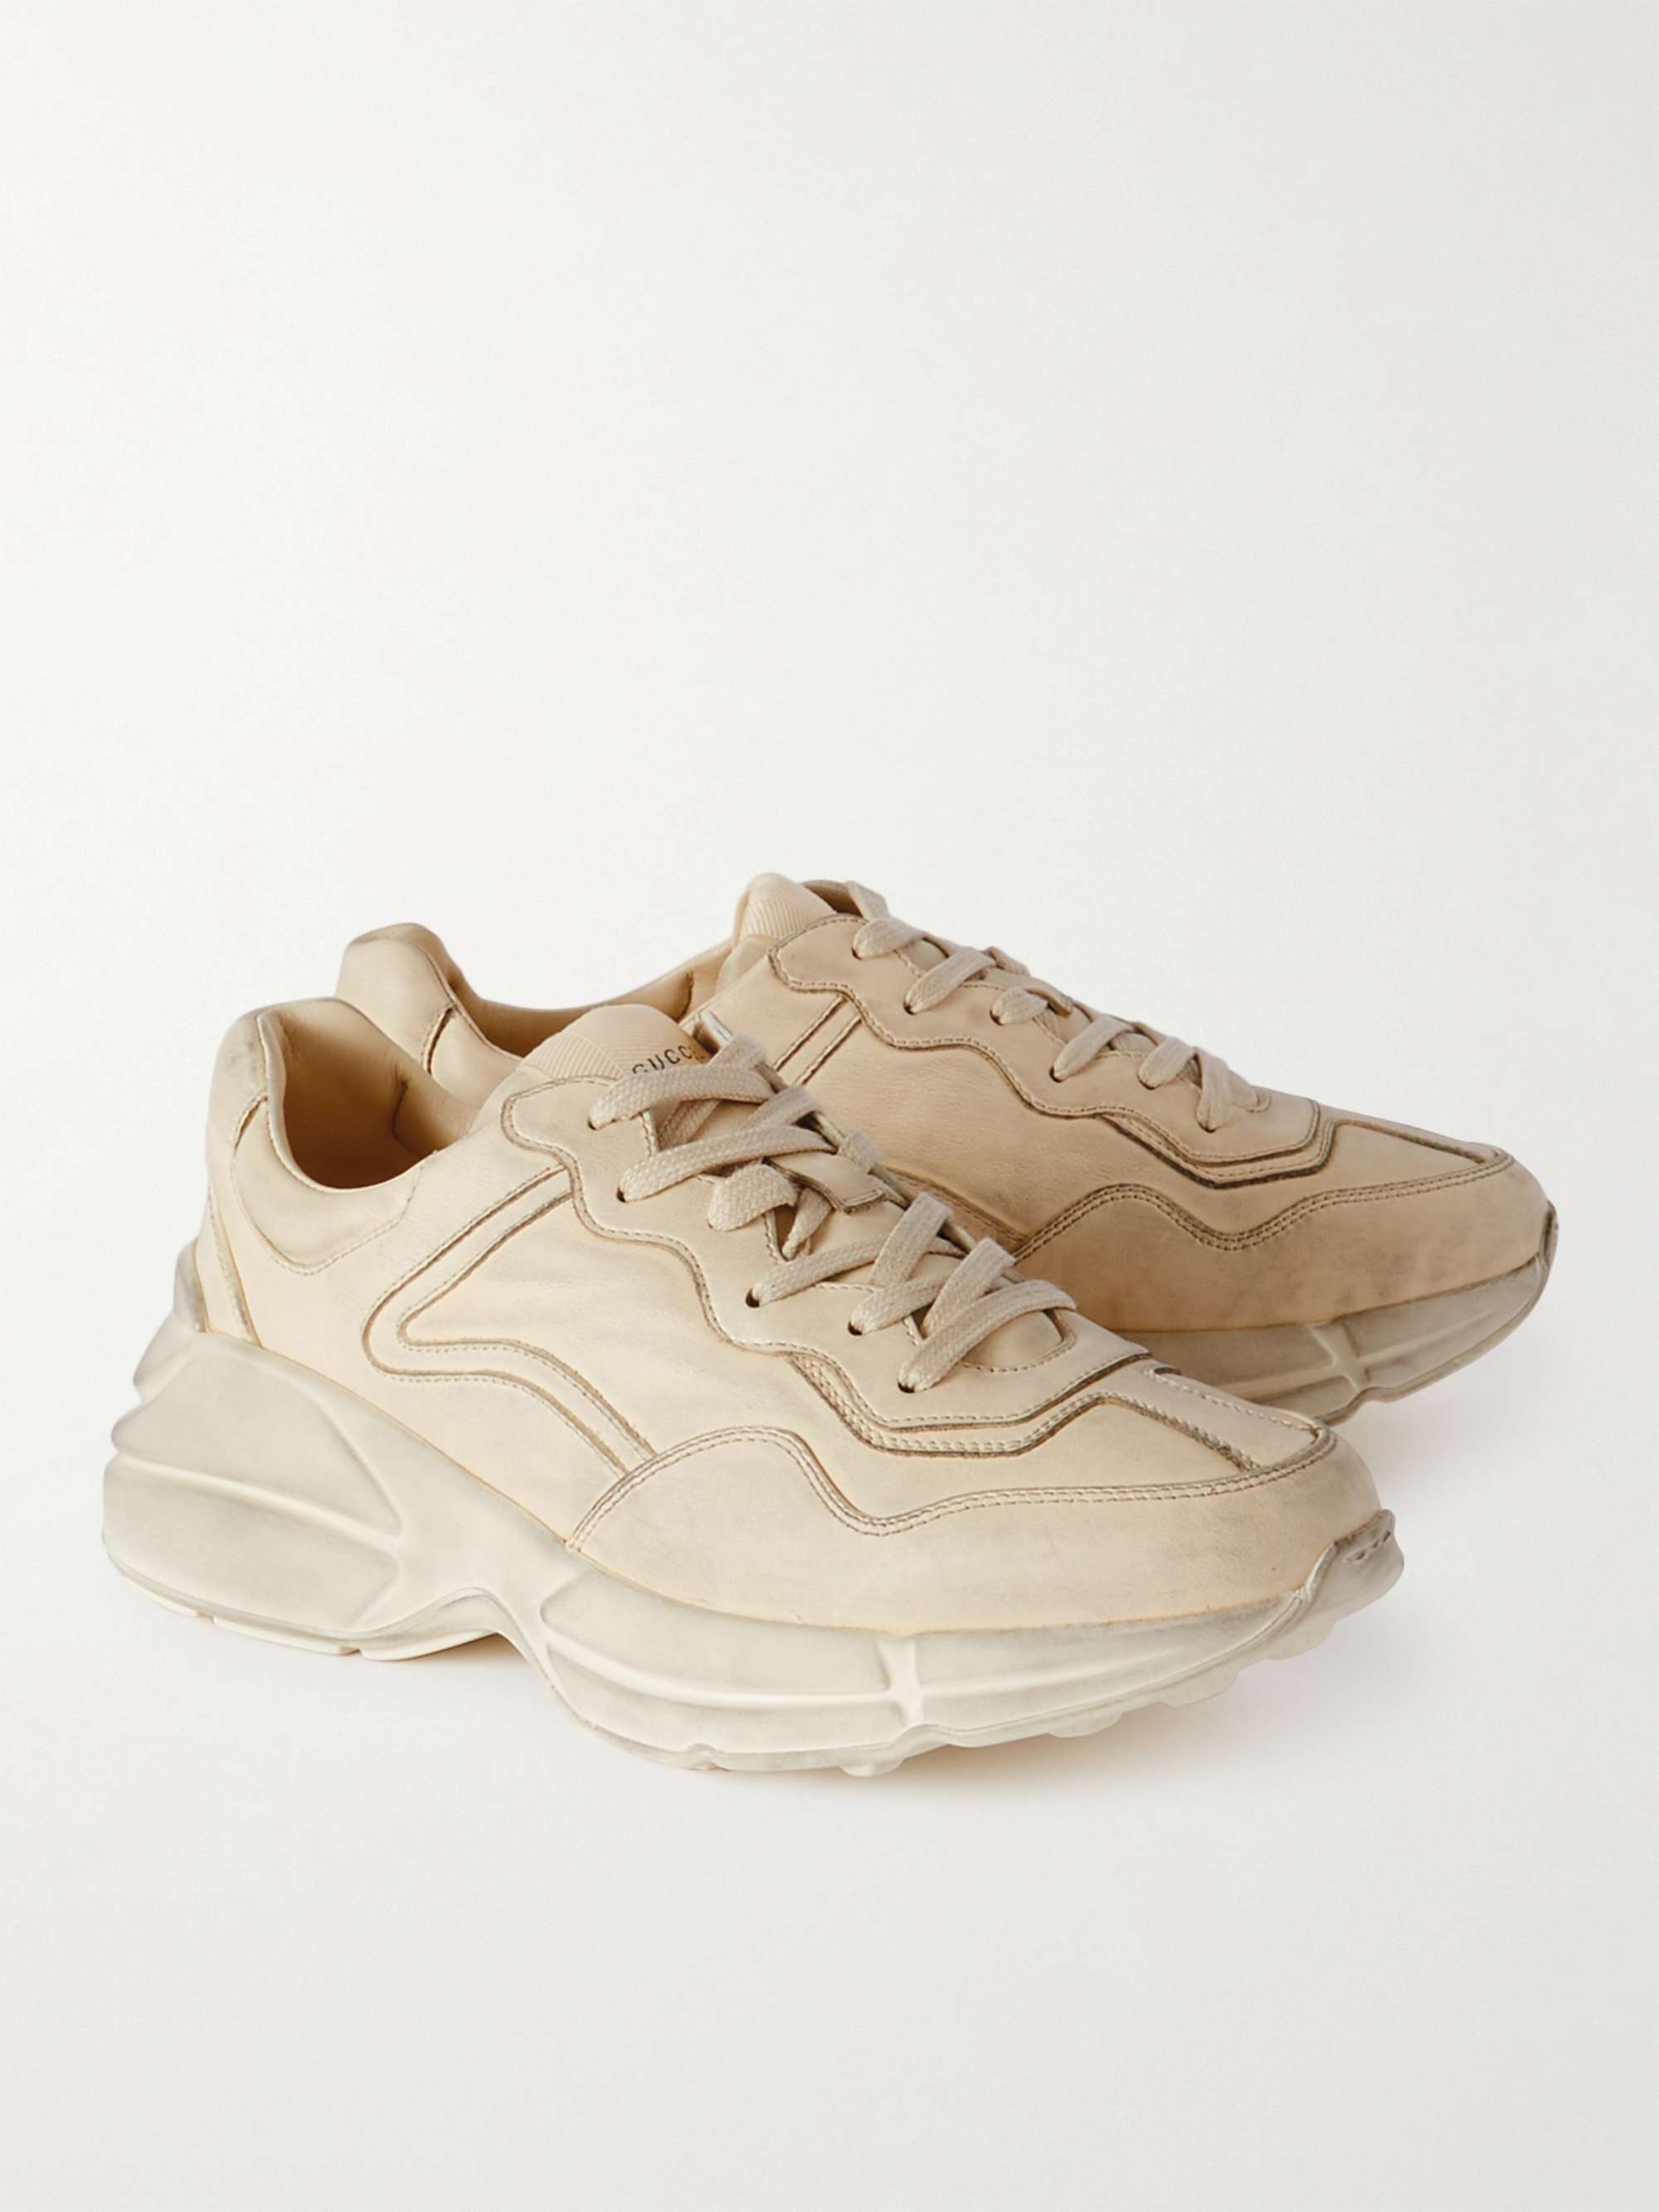 GUCCI Rhyton Distressed Leather Sneakers